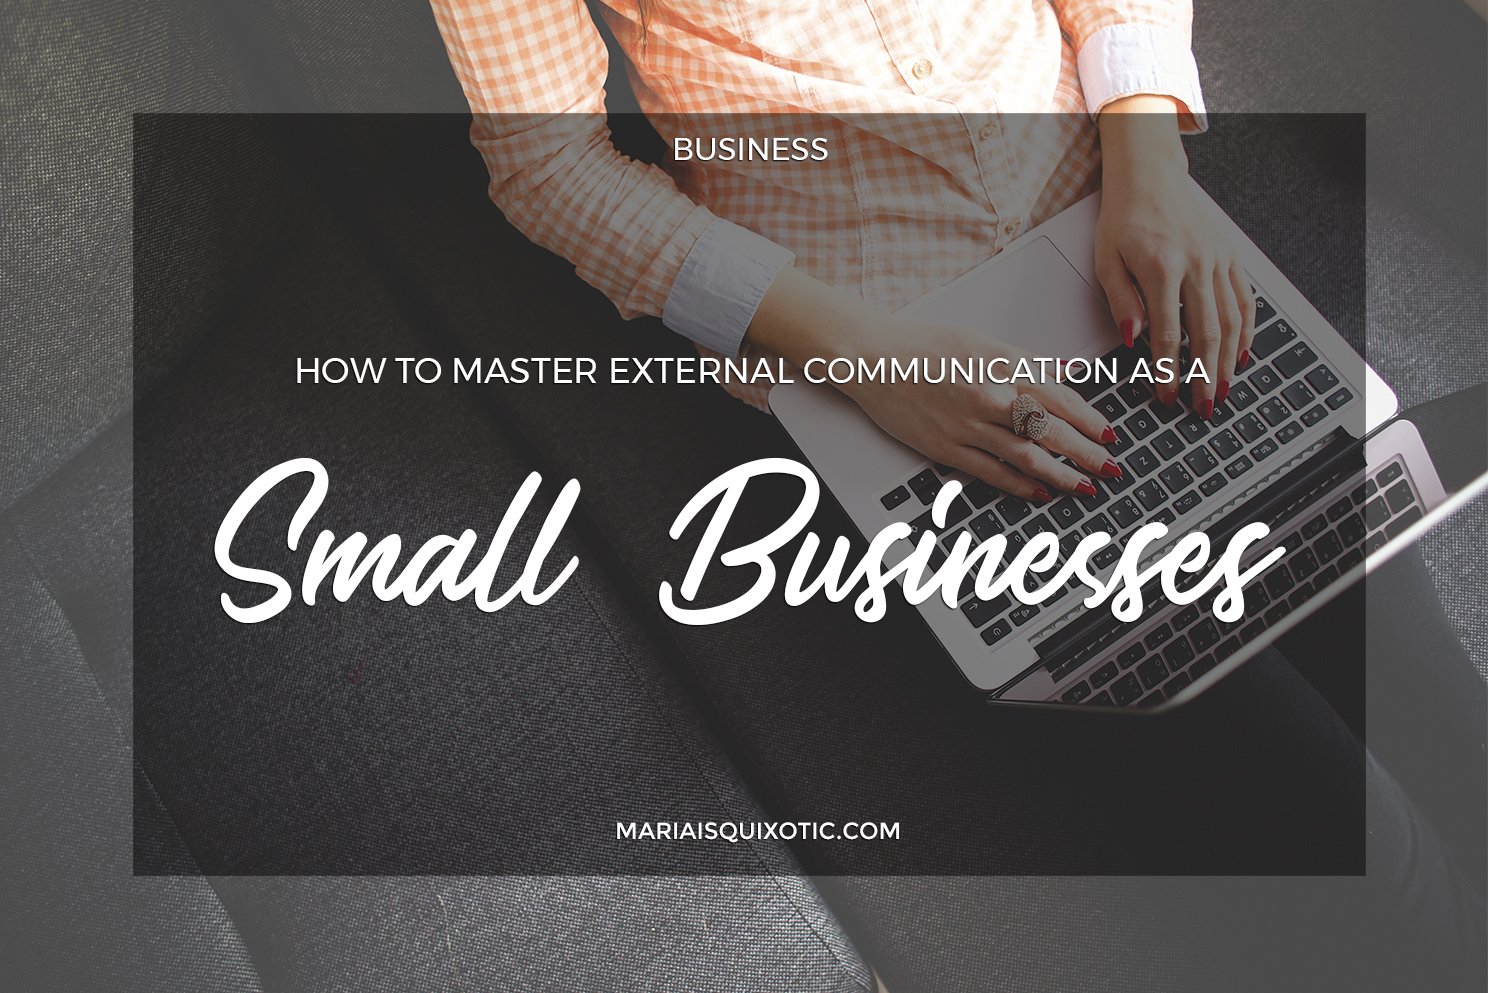 How to Master External Communication as a Small Business